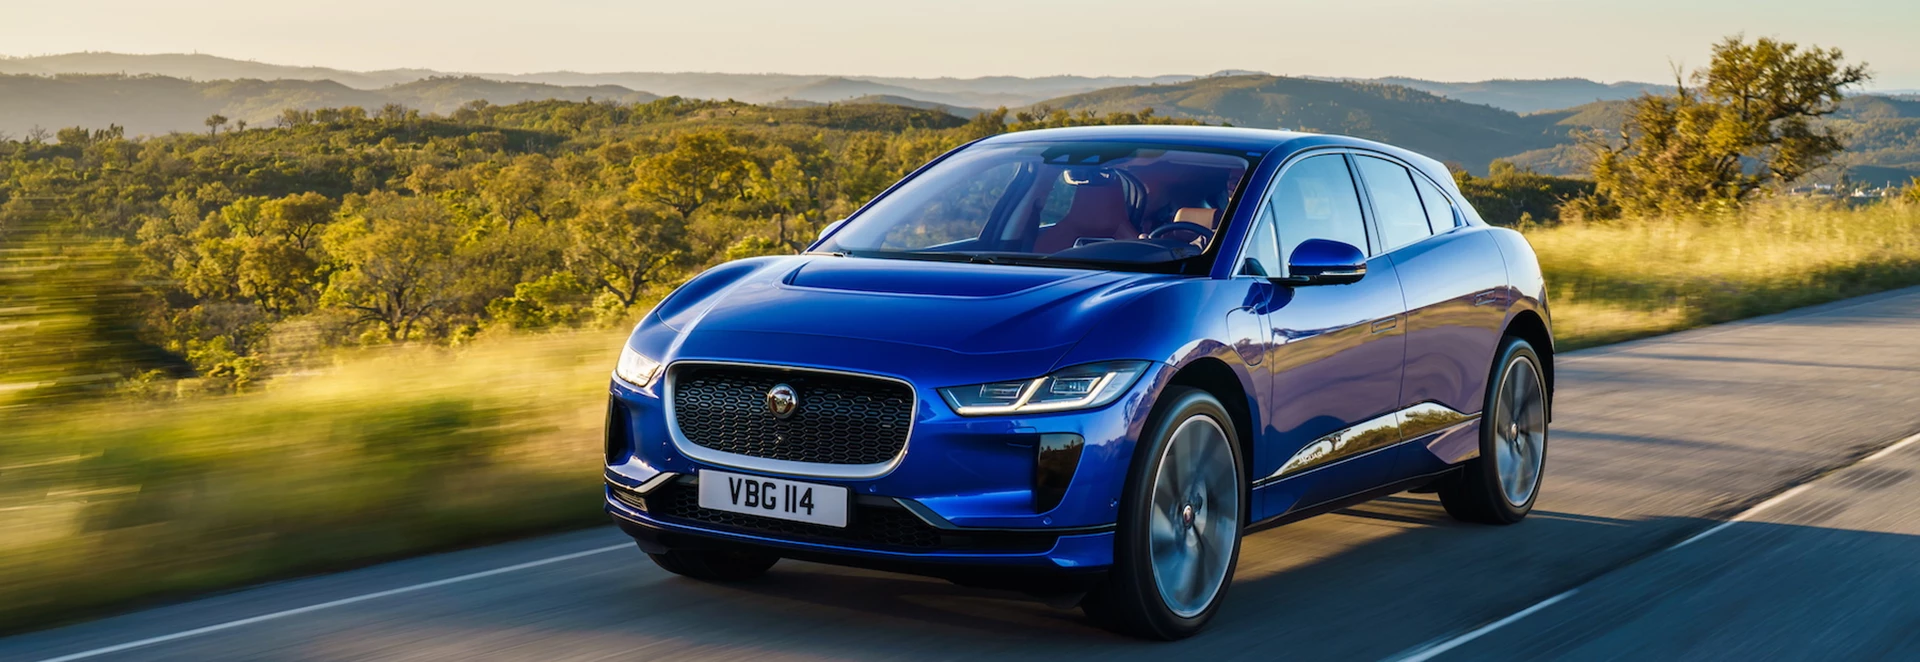 5 best electric SUVs to buy 2019